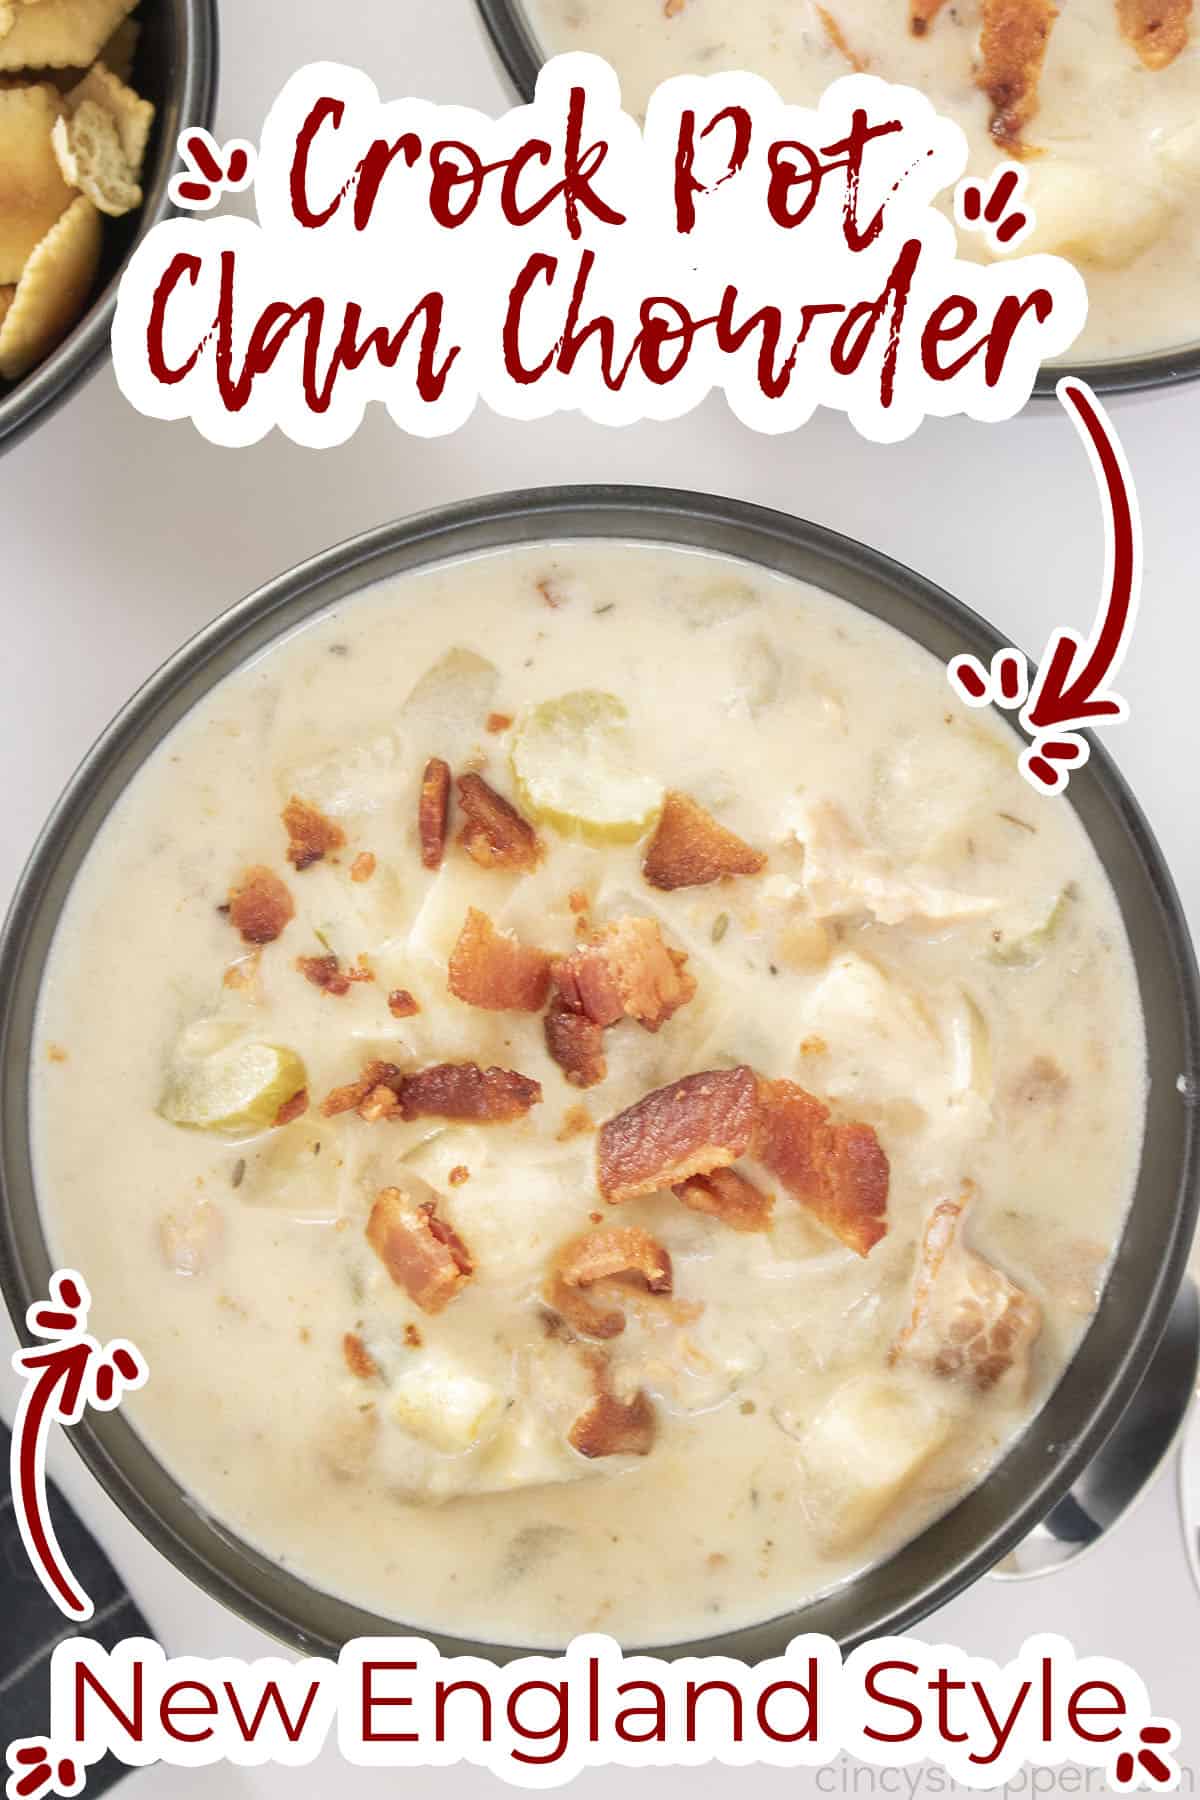 Text on image CrockPot Clam Chowder New England Style.